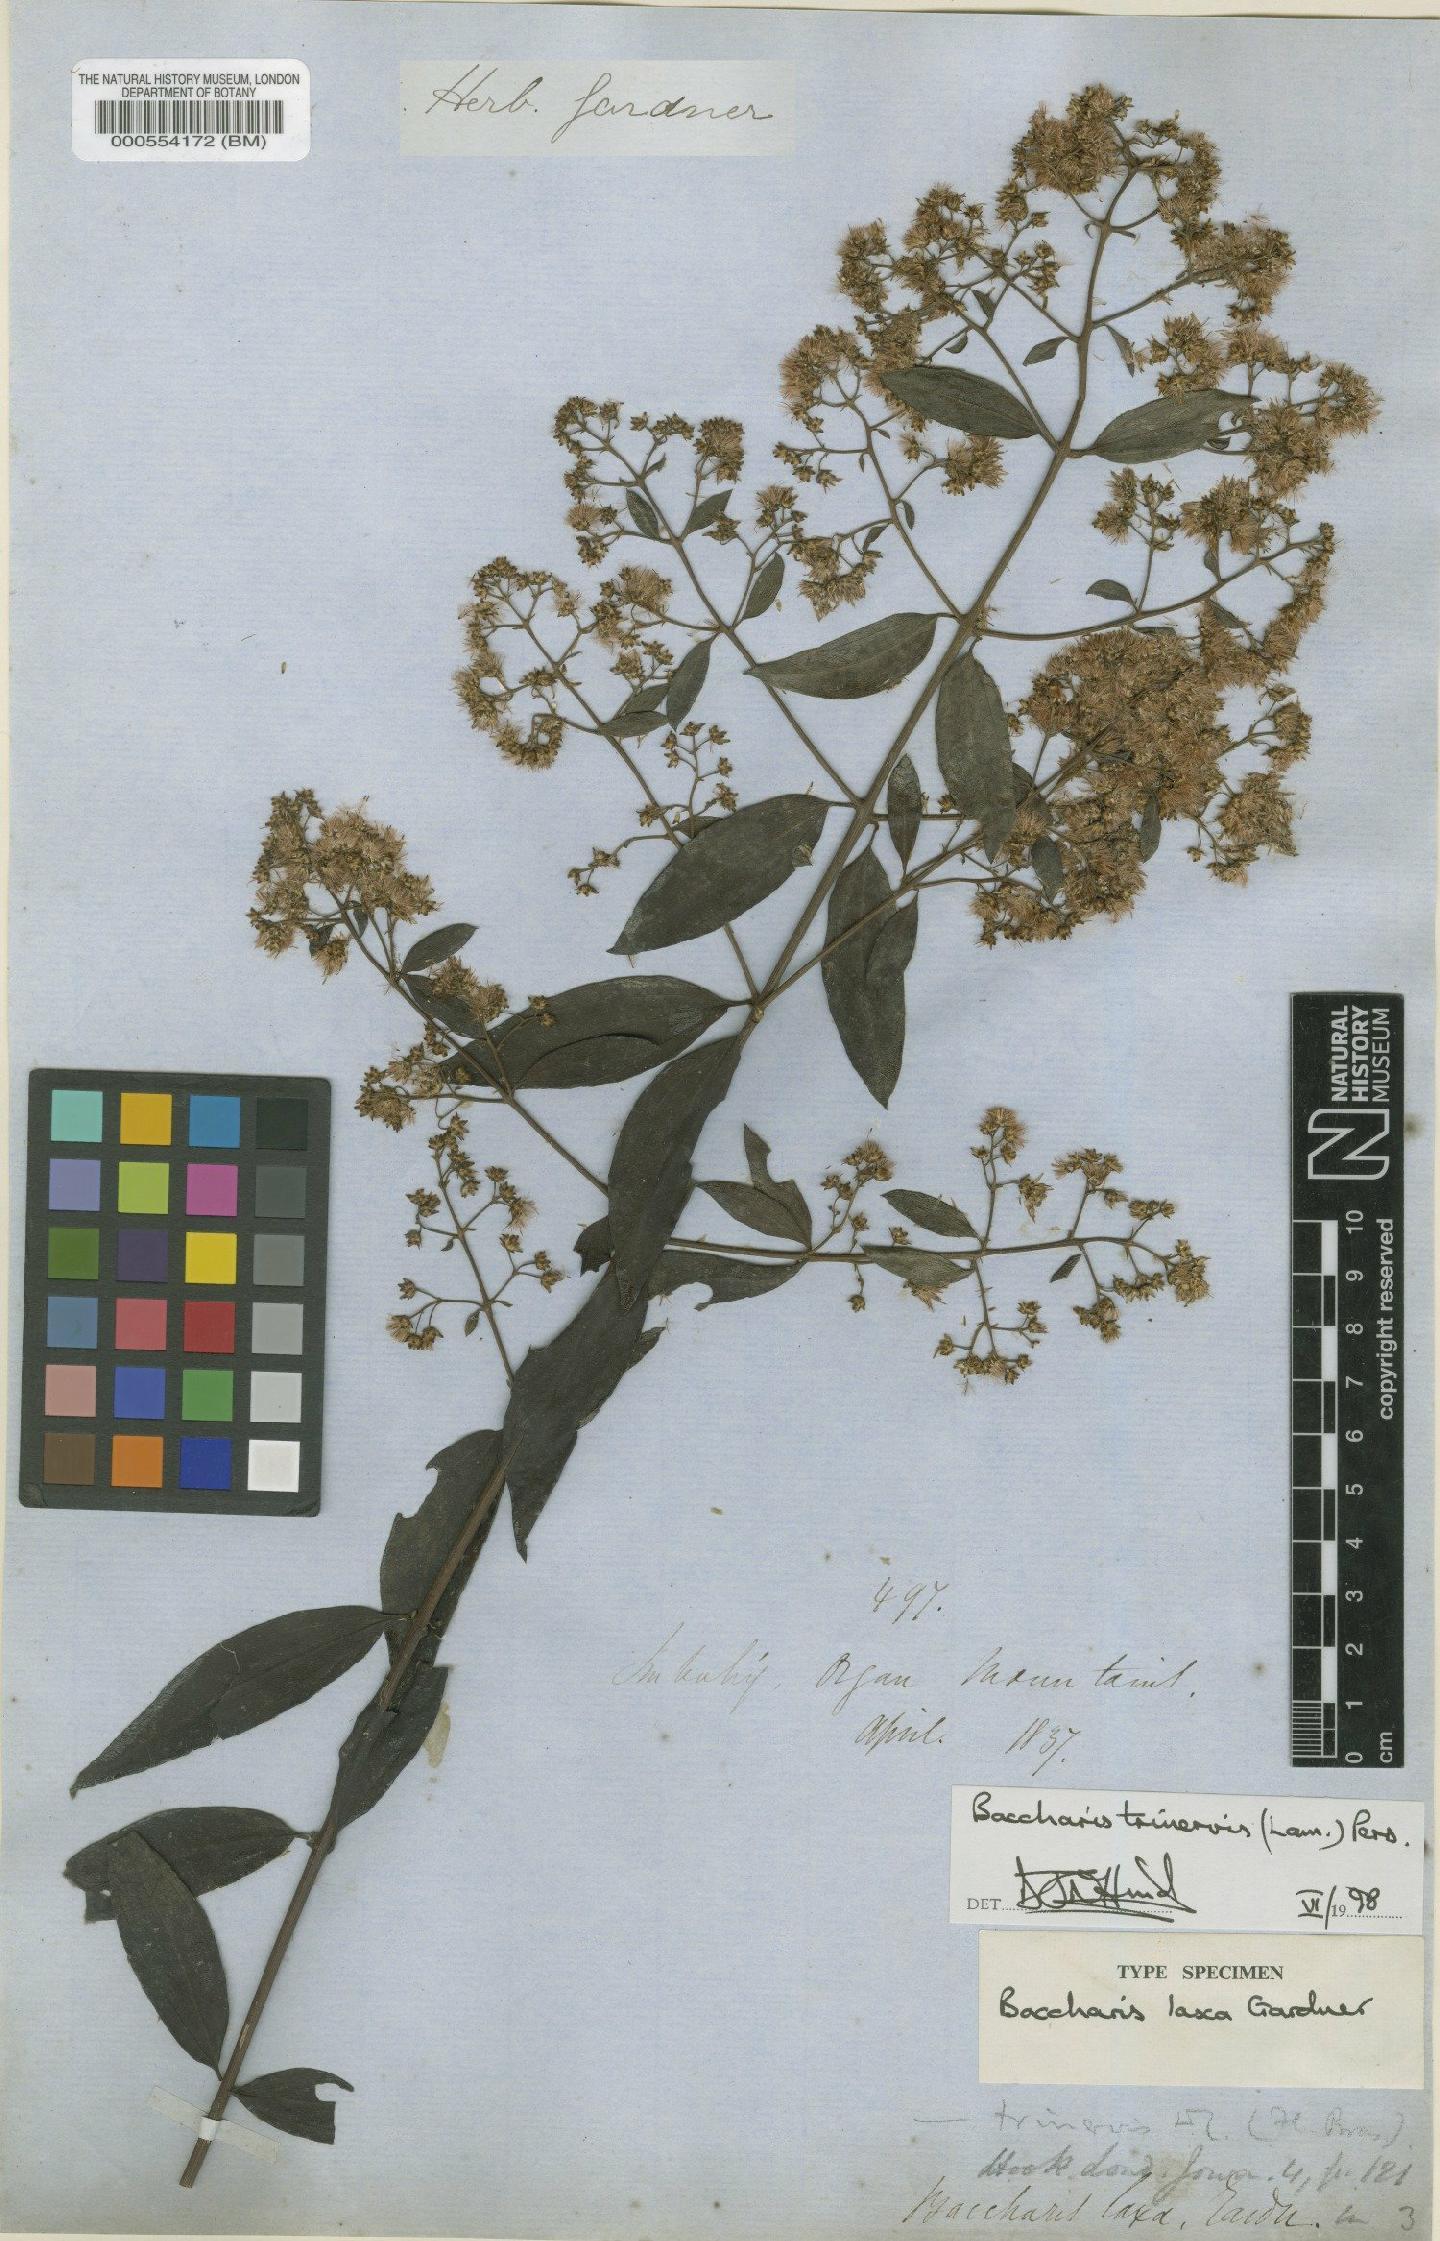 To NHMUK collection (Baccharis trinervis (Lam.) Pers.; Type; NHMUK:ecatalogue:4978227)